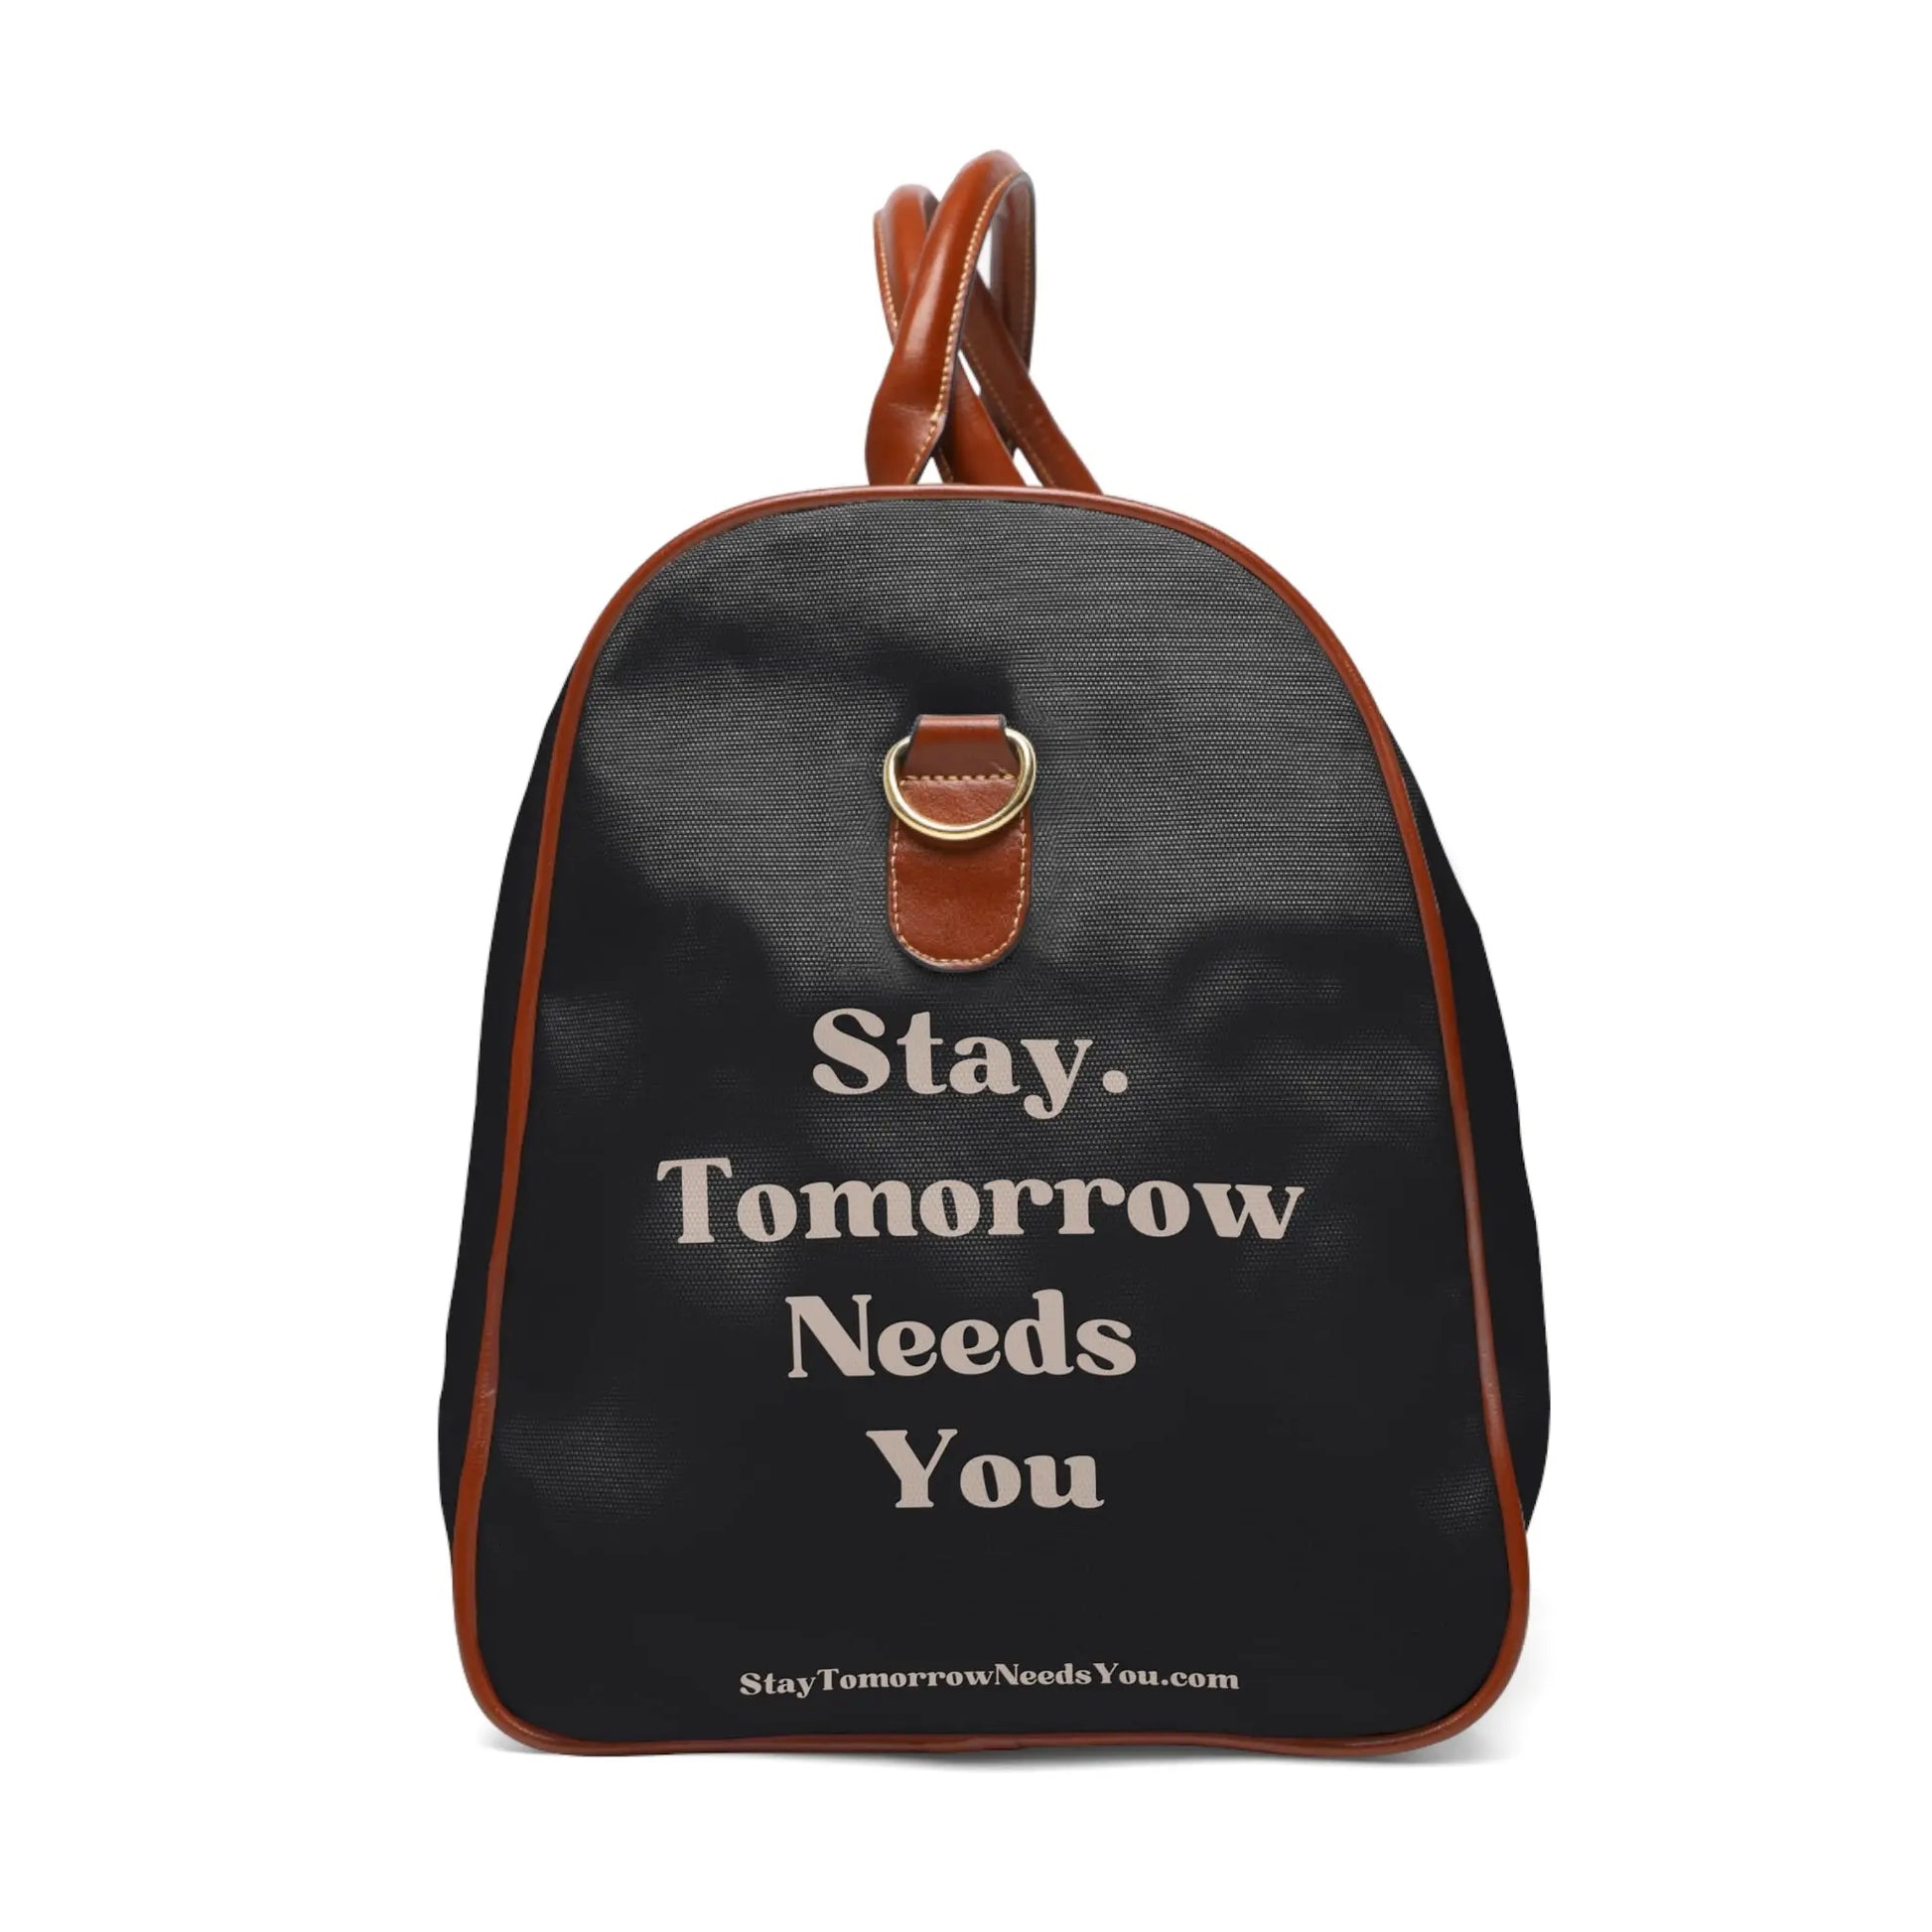 Suicide Awareness Stay Tomorrow Needs You Waterproof Travel Bag - Ideal for Mother’s Day travels. Carry essentials with purpose, supporting mental health awareness. Shop now